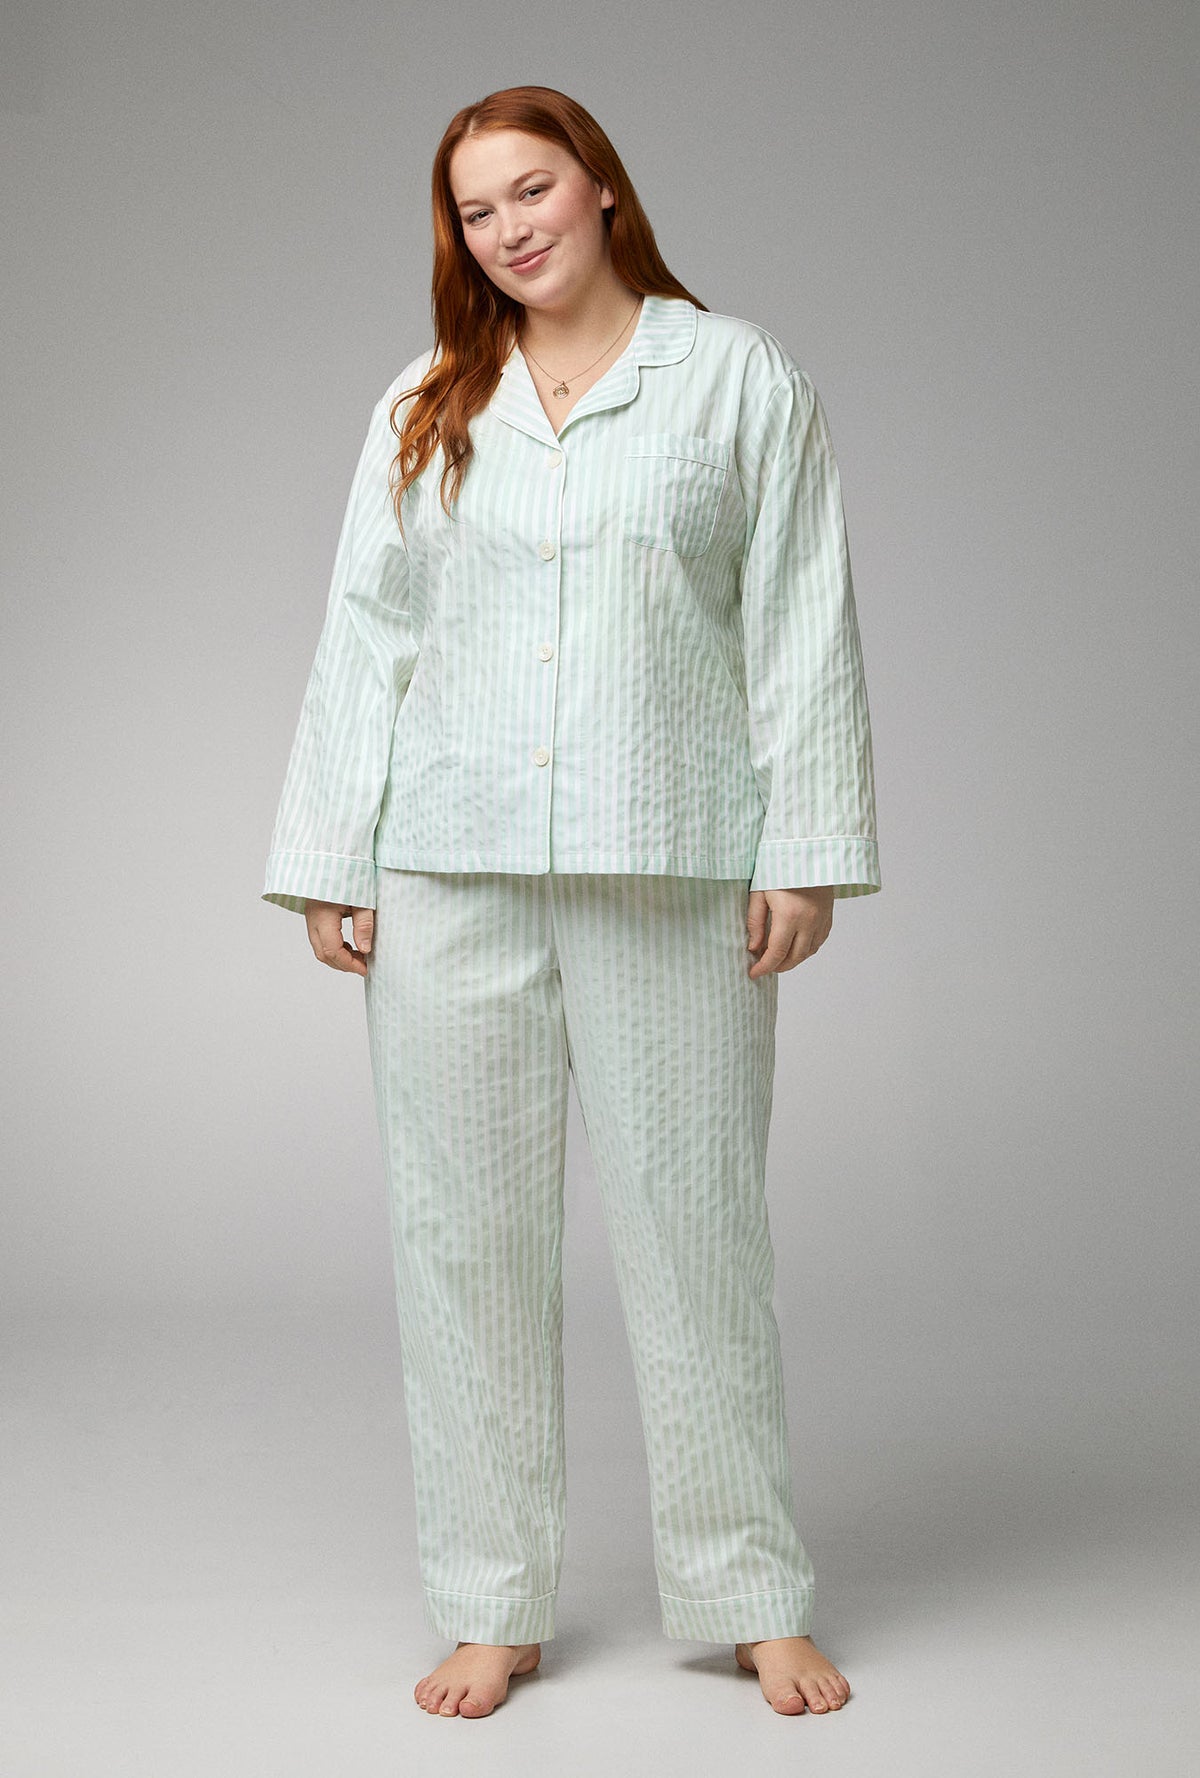 A lady wearing green Long Sleeve Classic Woven Cotton Sateen plus size PJ Set with Mint 3D Stripe print